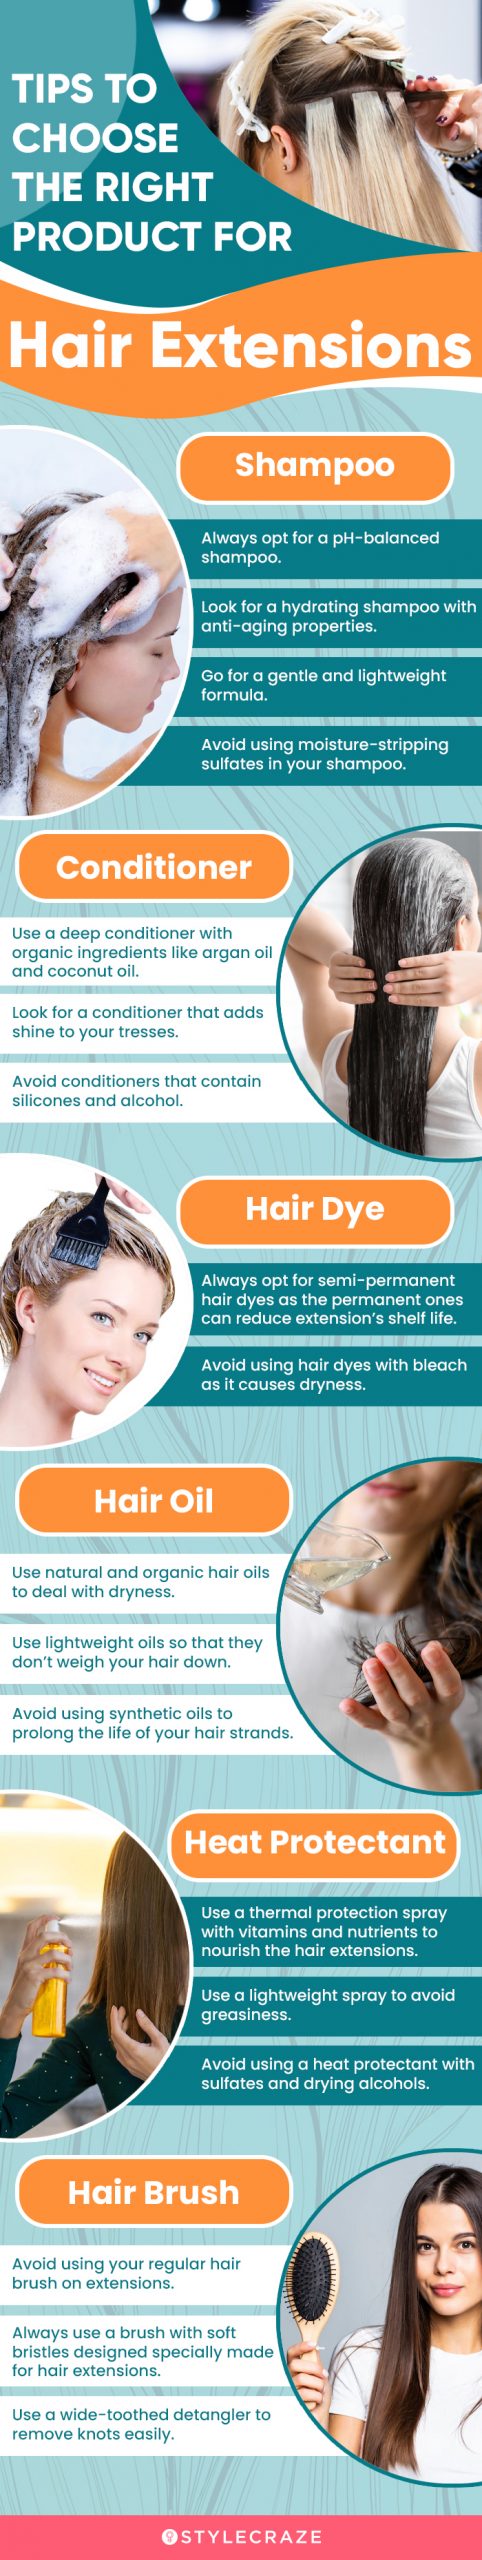 Tips To Choose The Right Product For Hair Extensions (infographic)